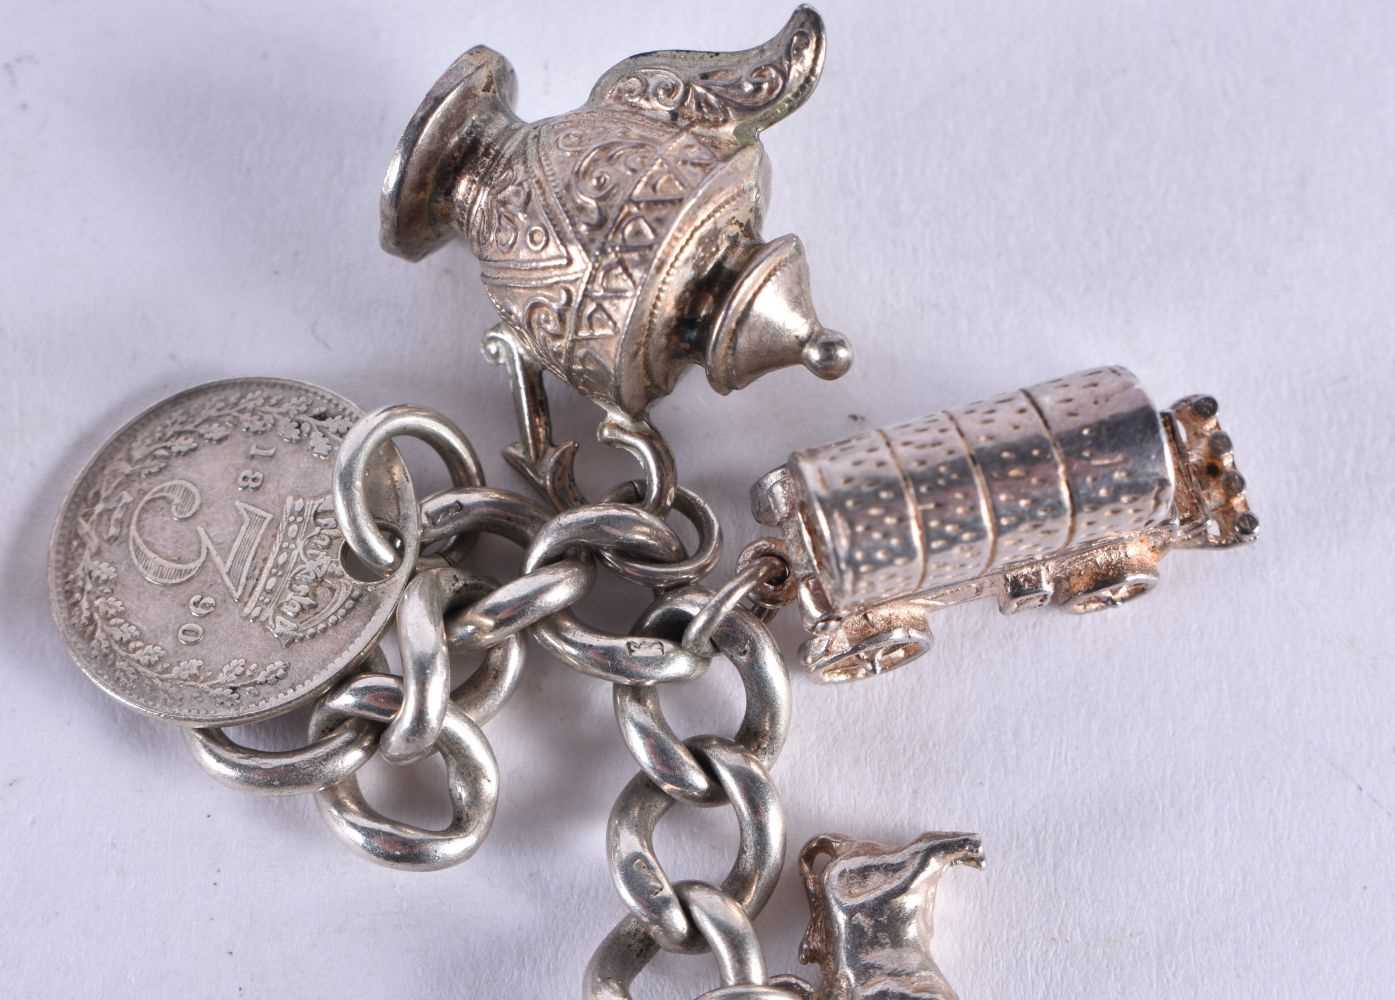 A SILVER CHARM BACELET. 74.6 grams. 20 cm wide. - Image 4 of 5